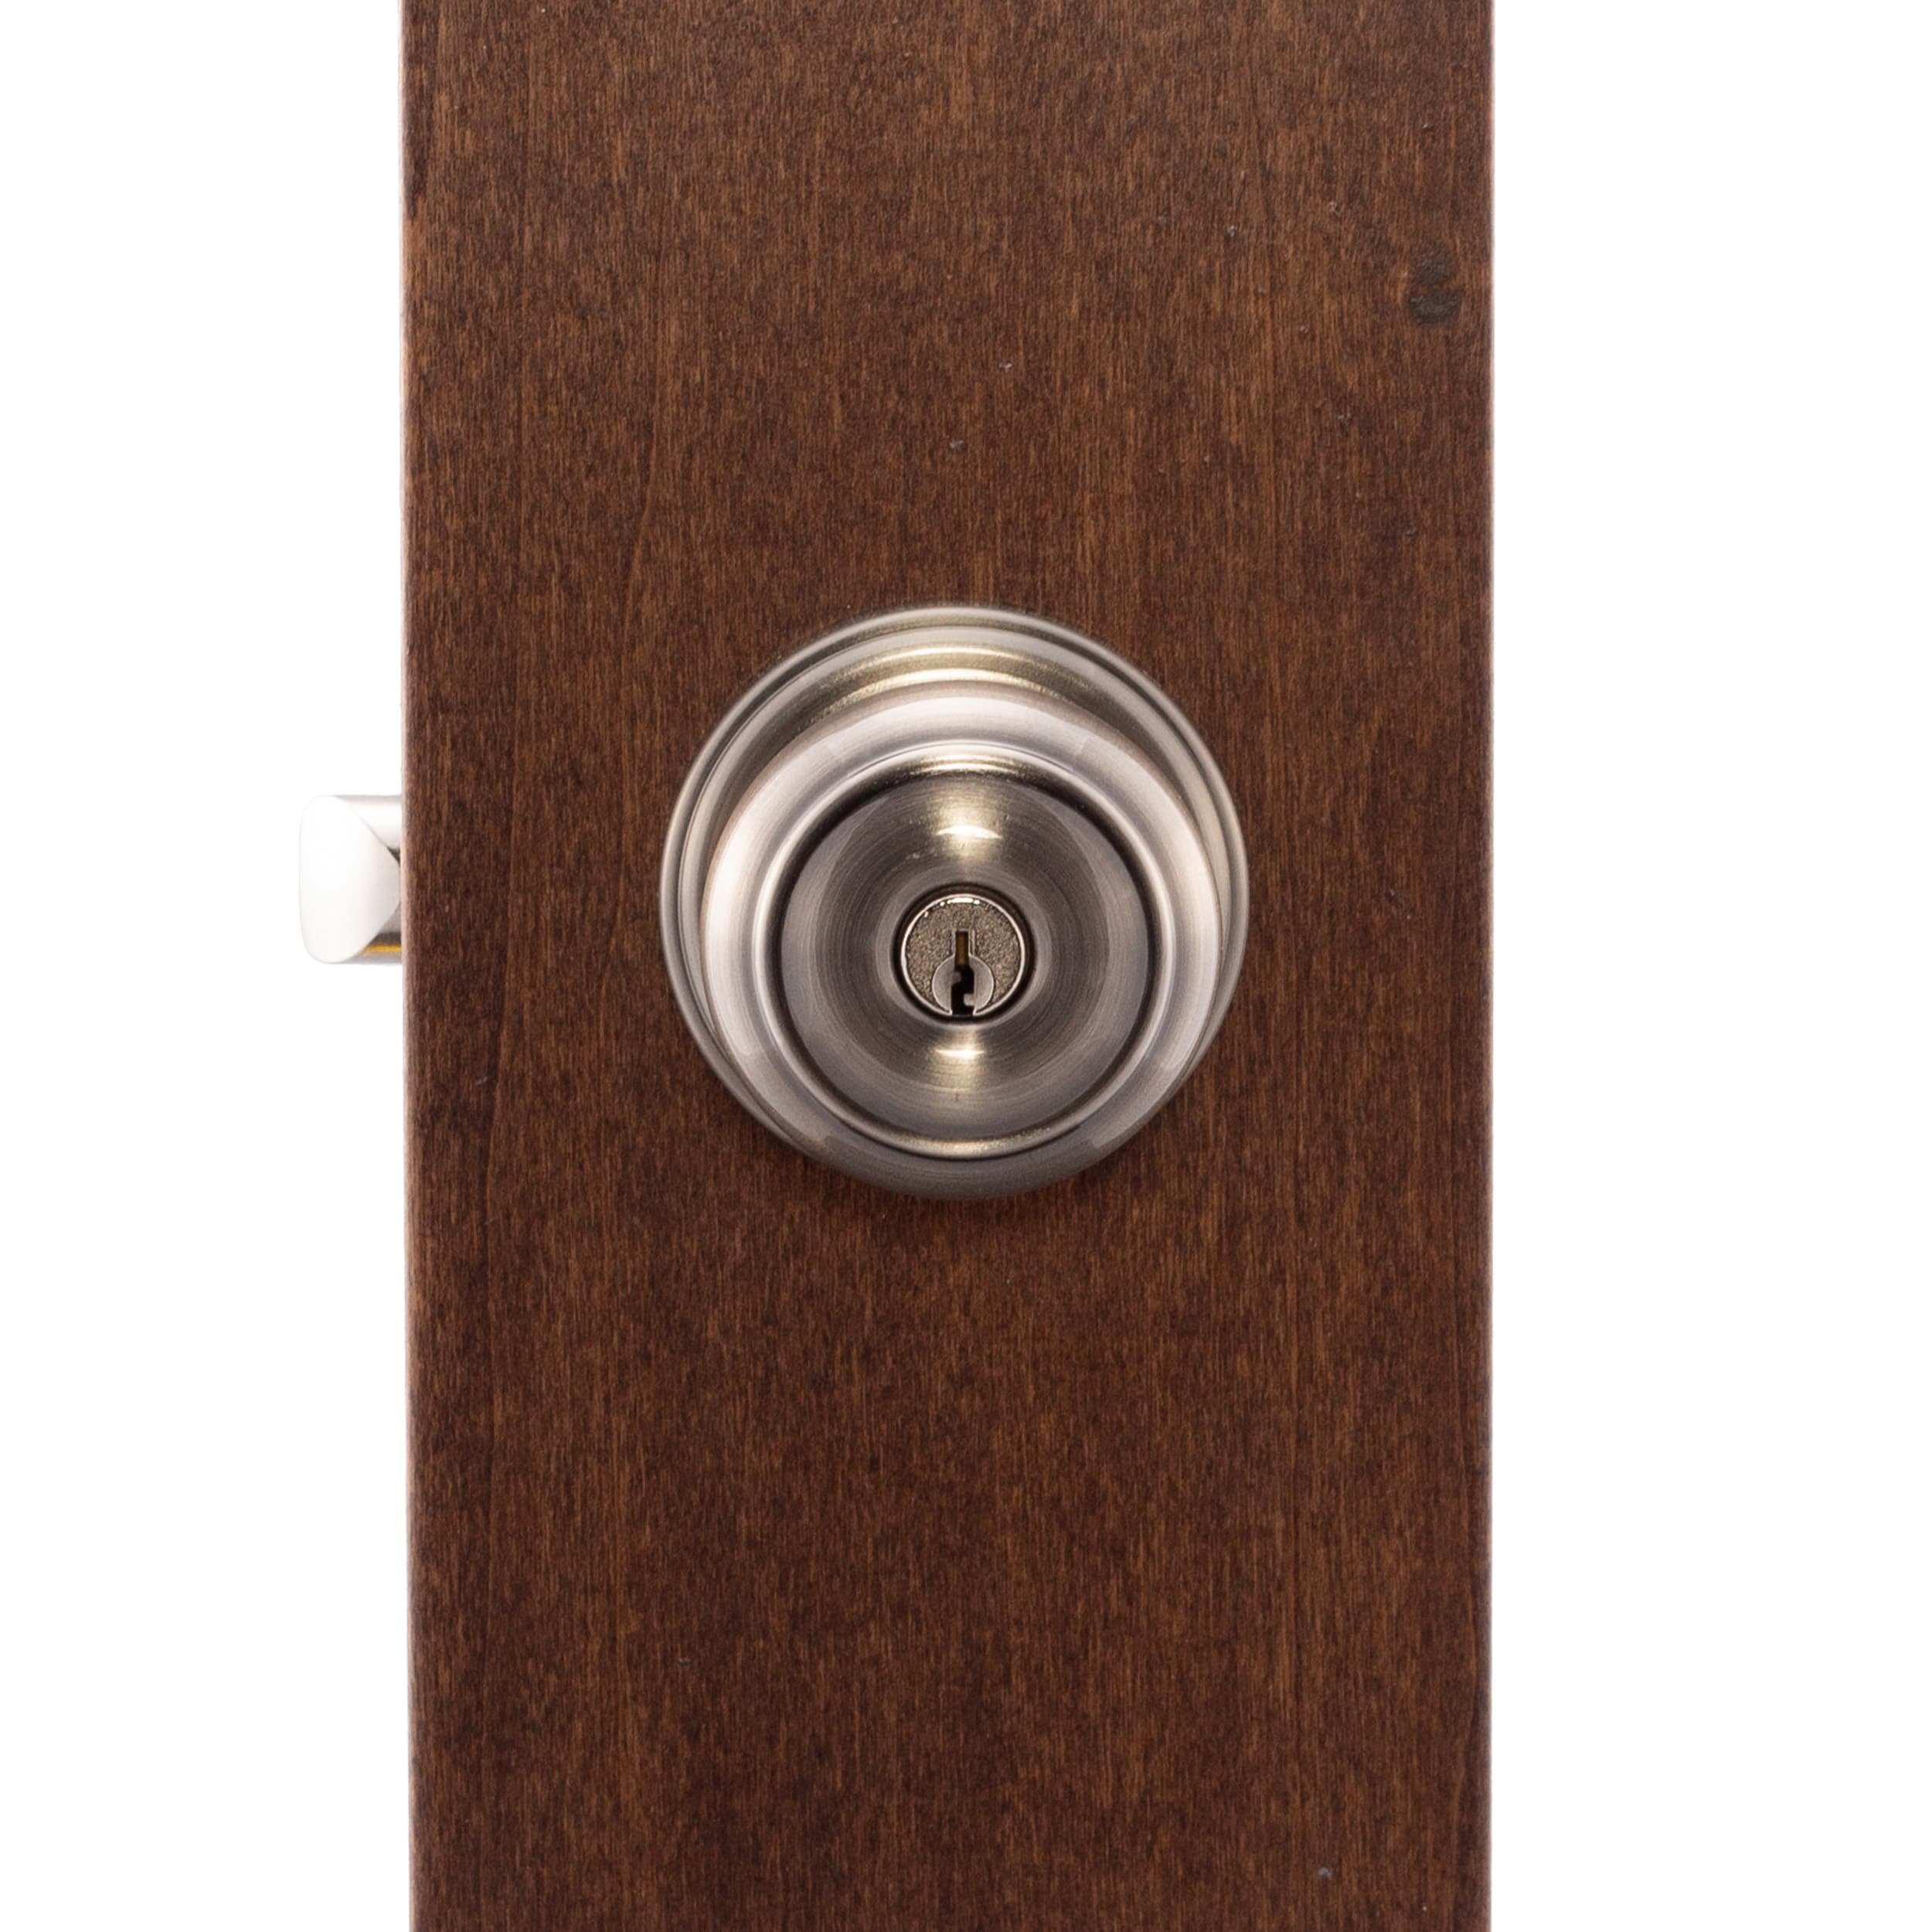 Copper Creek CK2040SS Satin Stainless Colonial Keyed Entry Single Cylinder  Door Knob Set with Colonial Knob and Round Rose